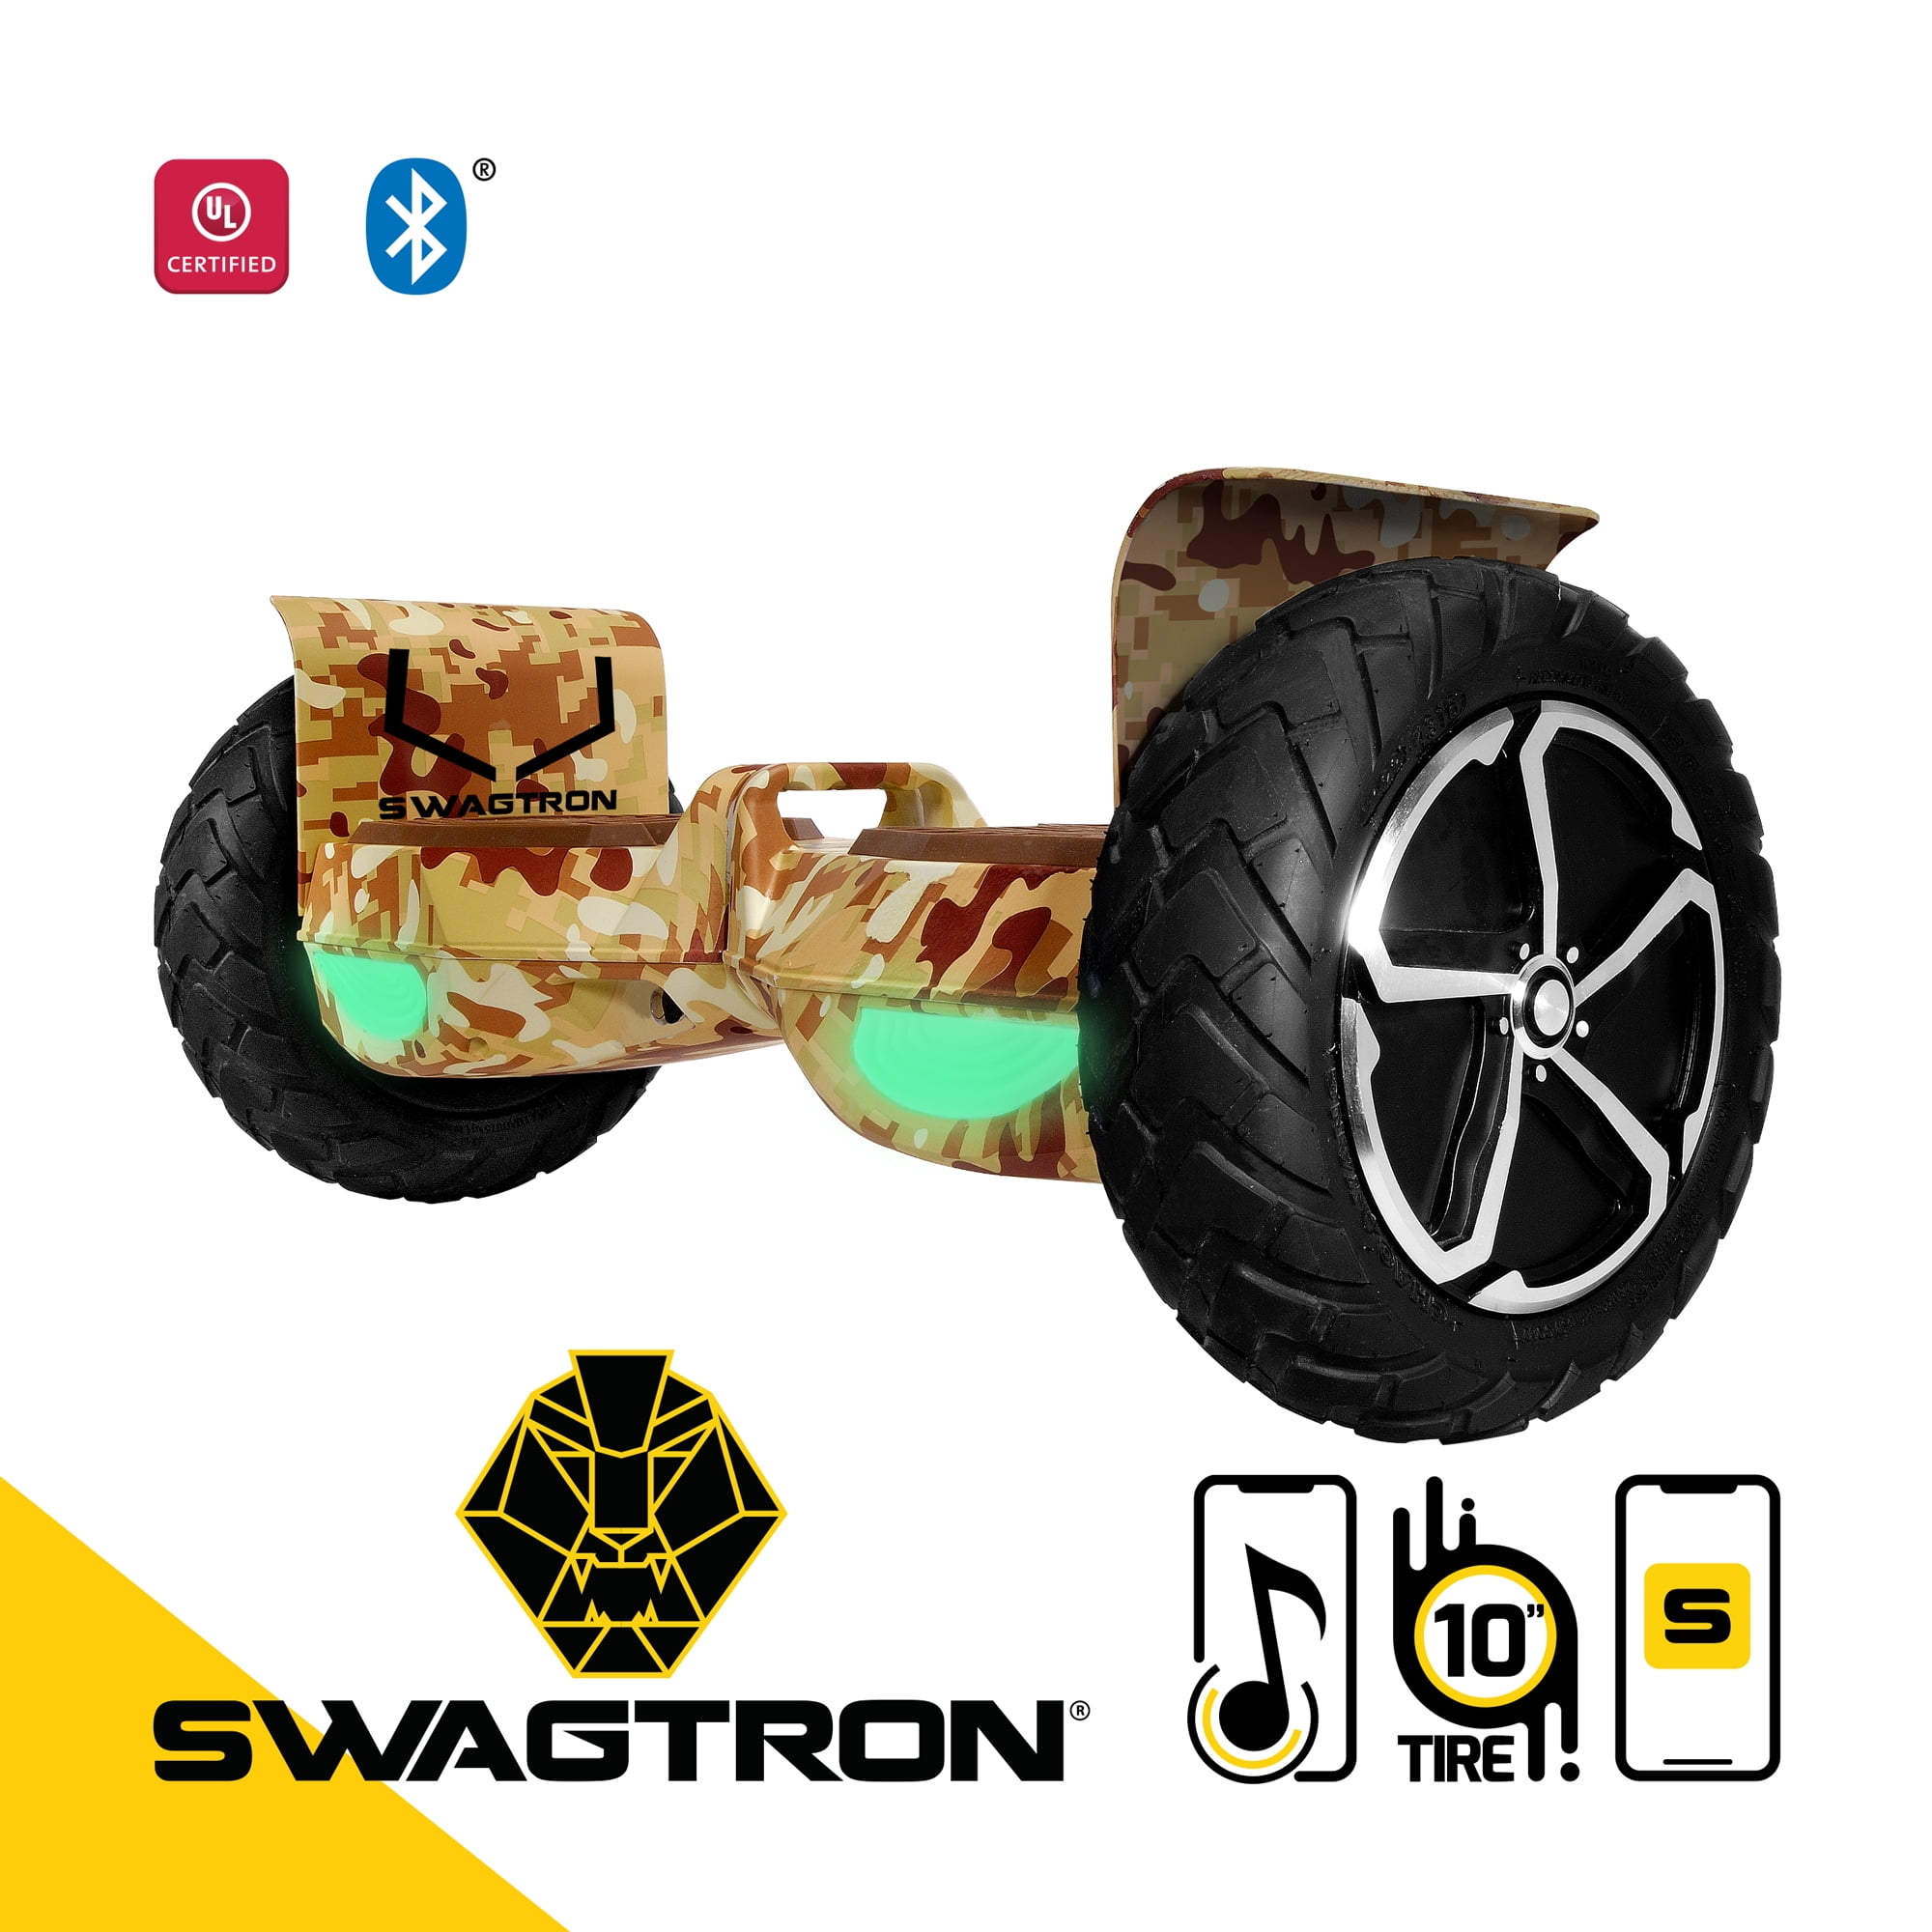 Swagtron T6 Hoverboard, lb Weight Limit, Black, Bluetooth Speaker, 10 Inch Wheel Mph UL-Compliant (Recertified) -